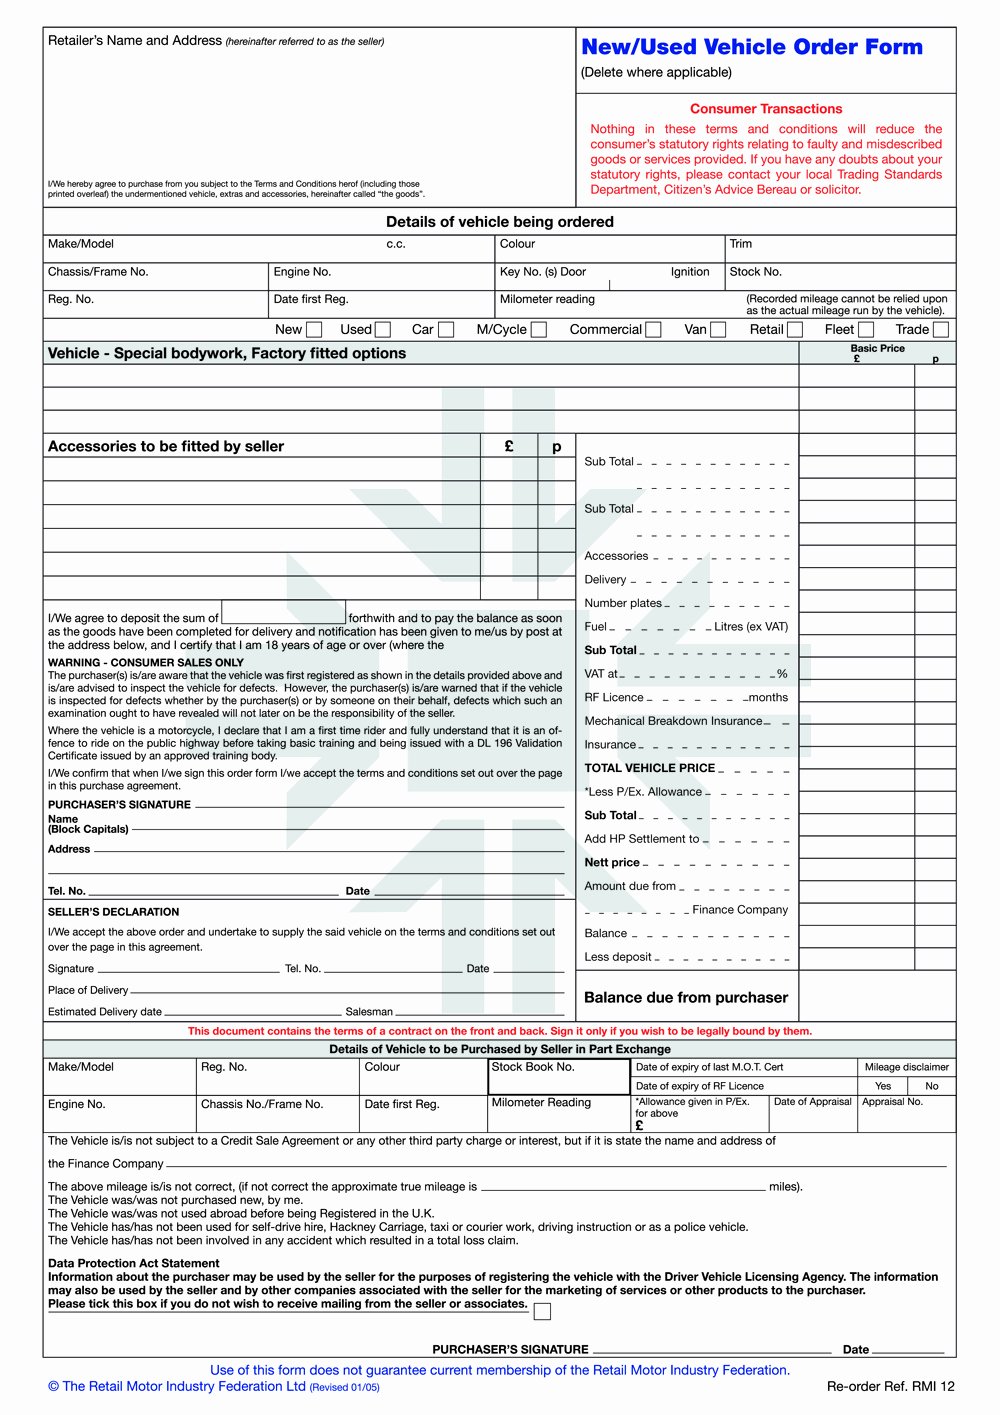 Vehicle Purchase order Template Lovely Rmi012p New Used Vehicle order form Pad Rmi Webshop